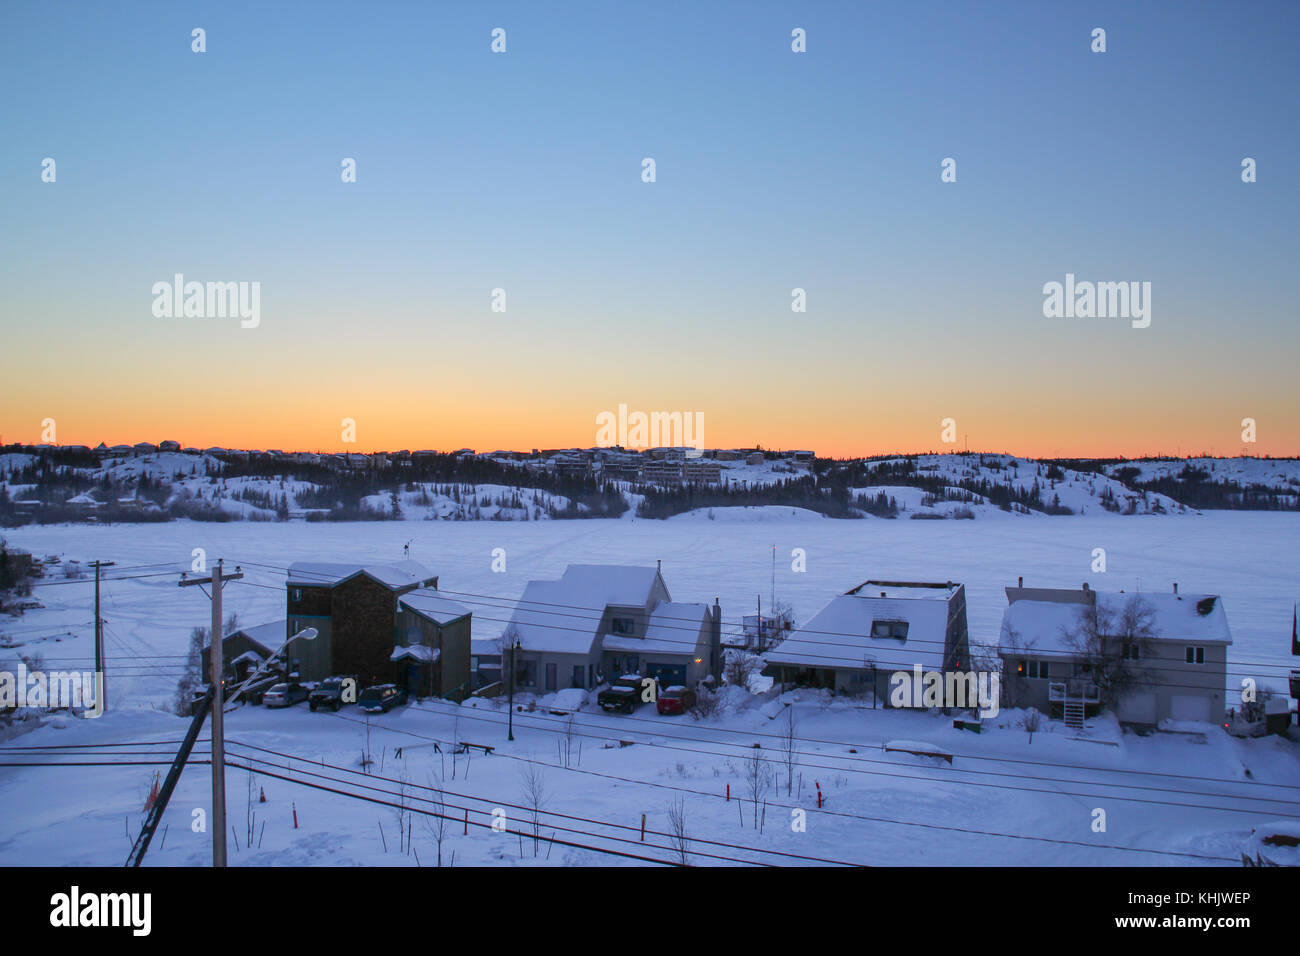 wintry landscape of Yellowknife, Canada Stock Photo